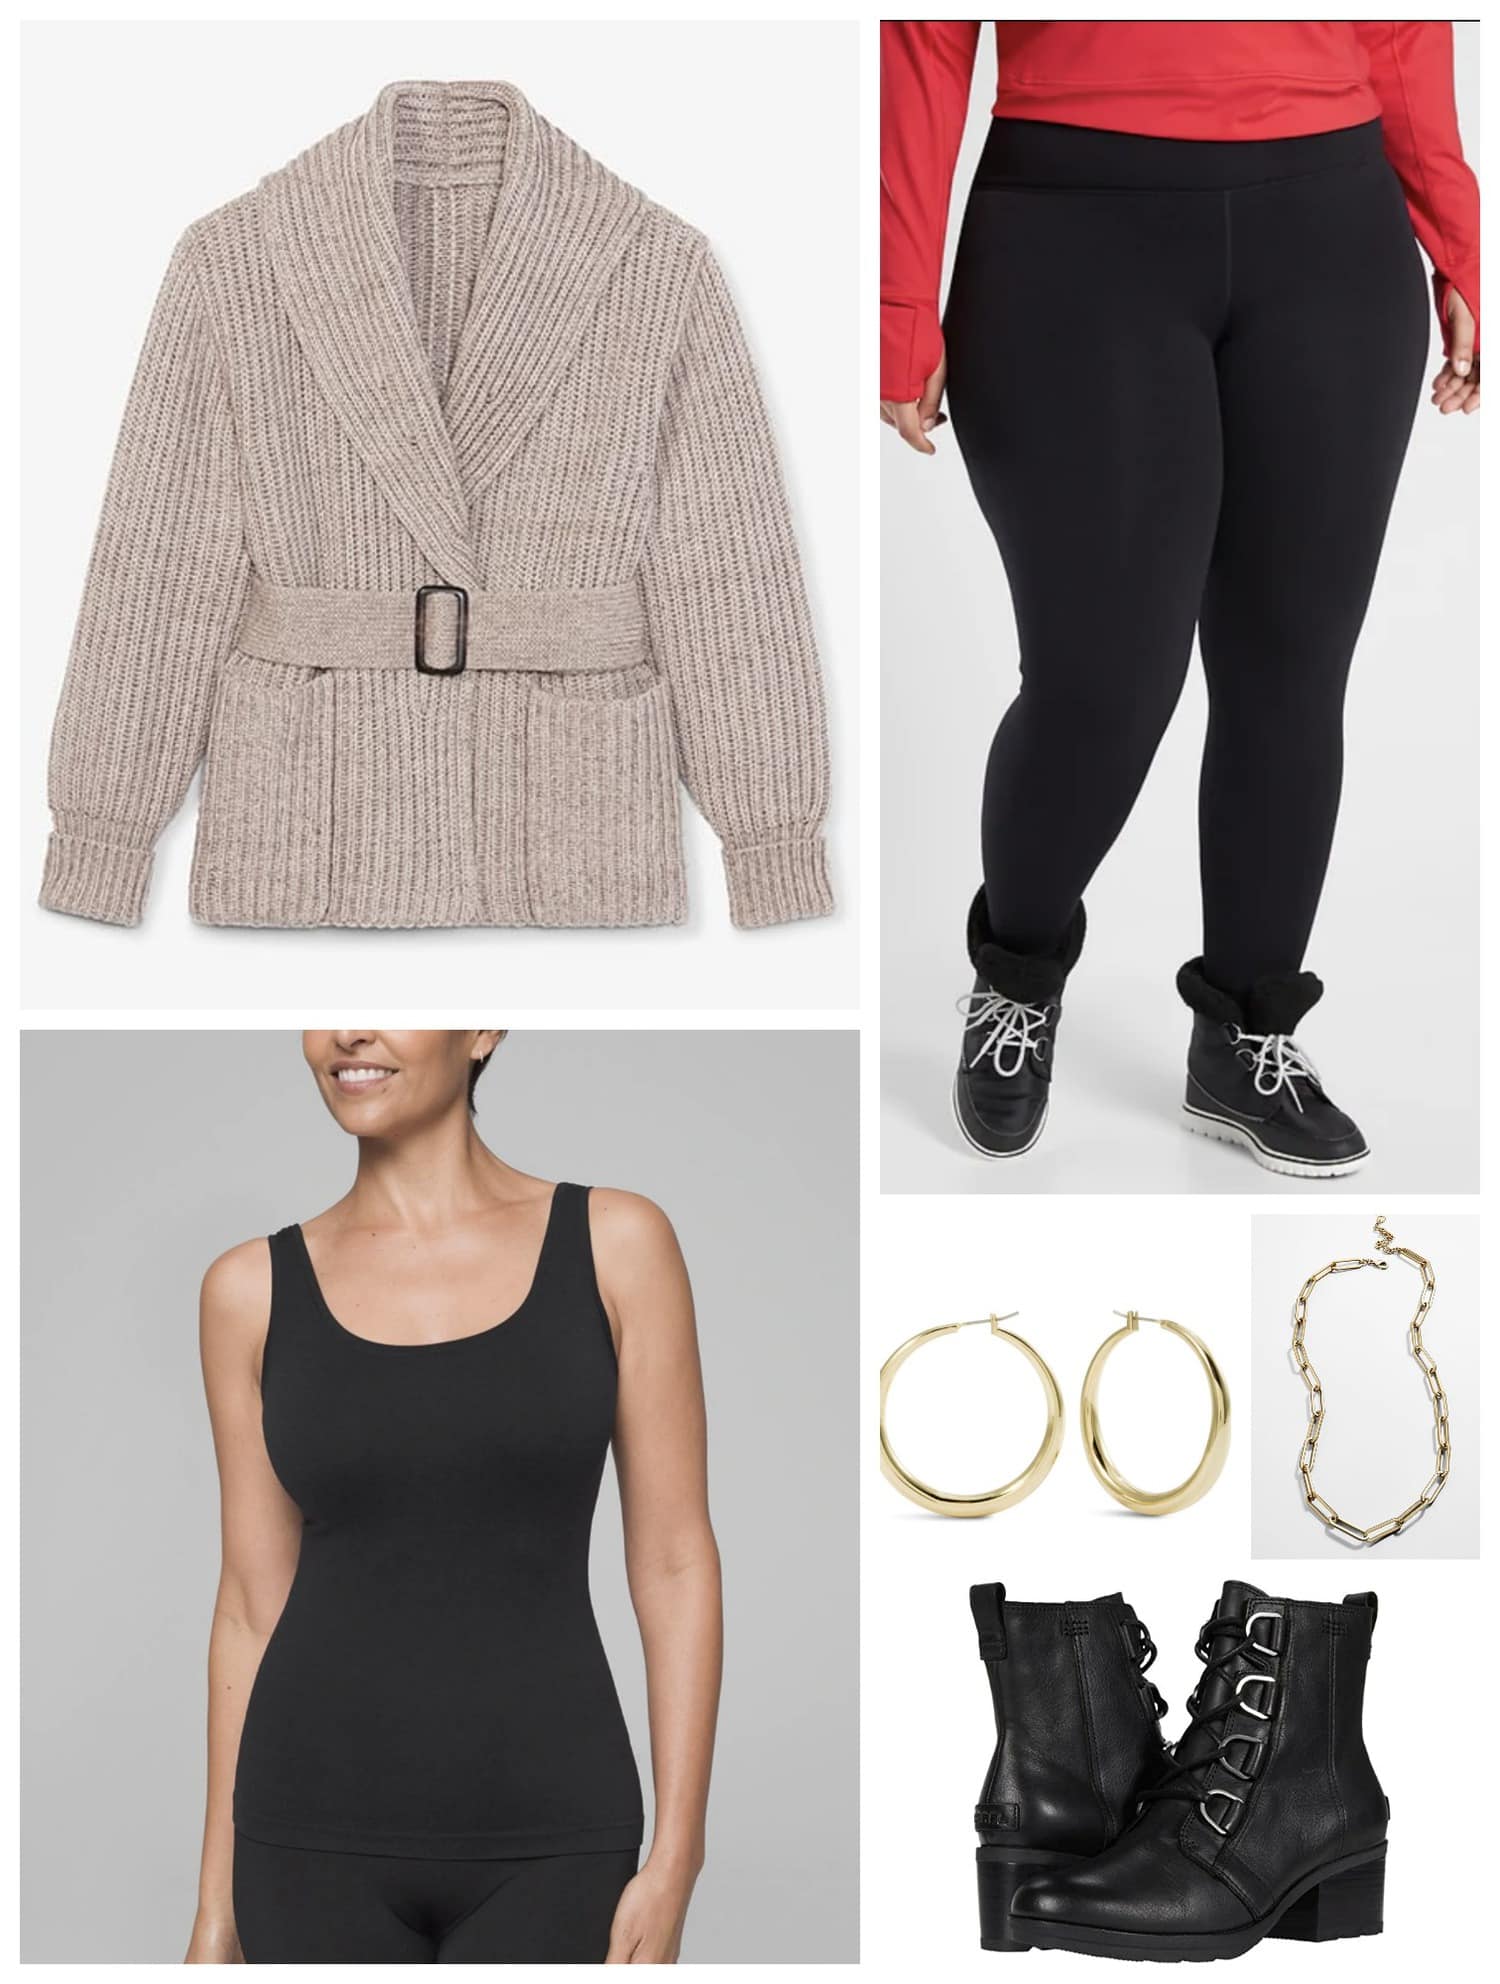 Tabletop Dressing with fleece leggings and an MM LaFleur belted sweater coat